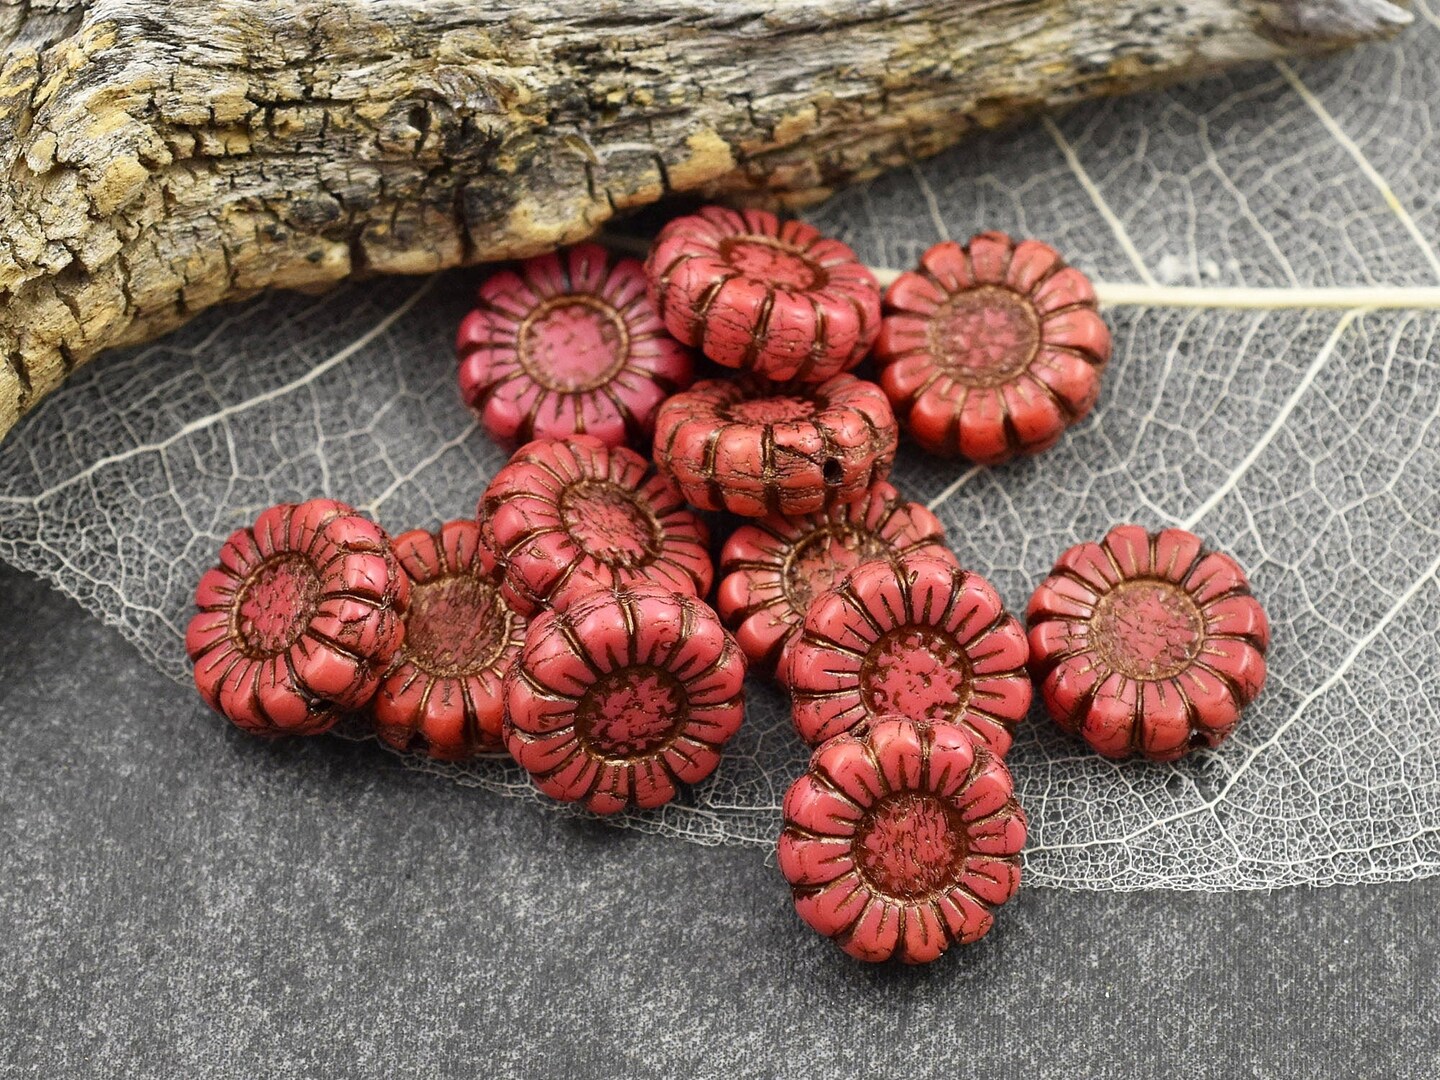 12mm Sunflower Coin Beads - Red with Bronze Wash - 6 or 12 Beads –  funkyprettybeads